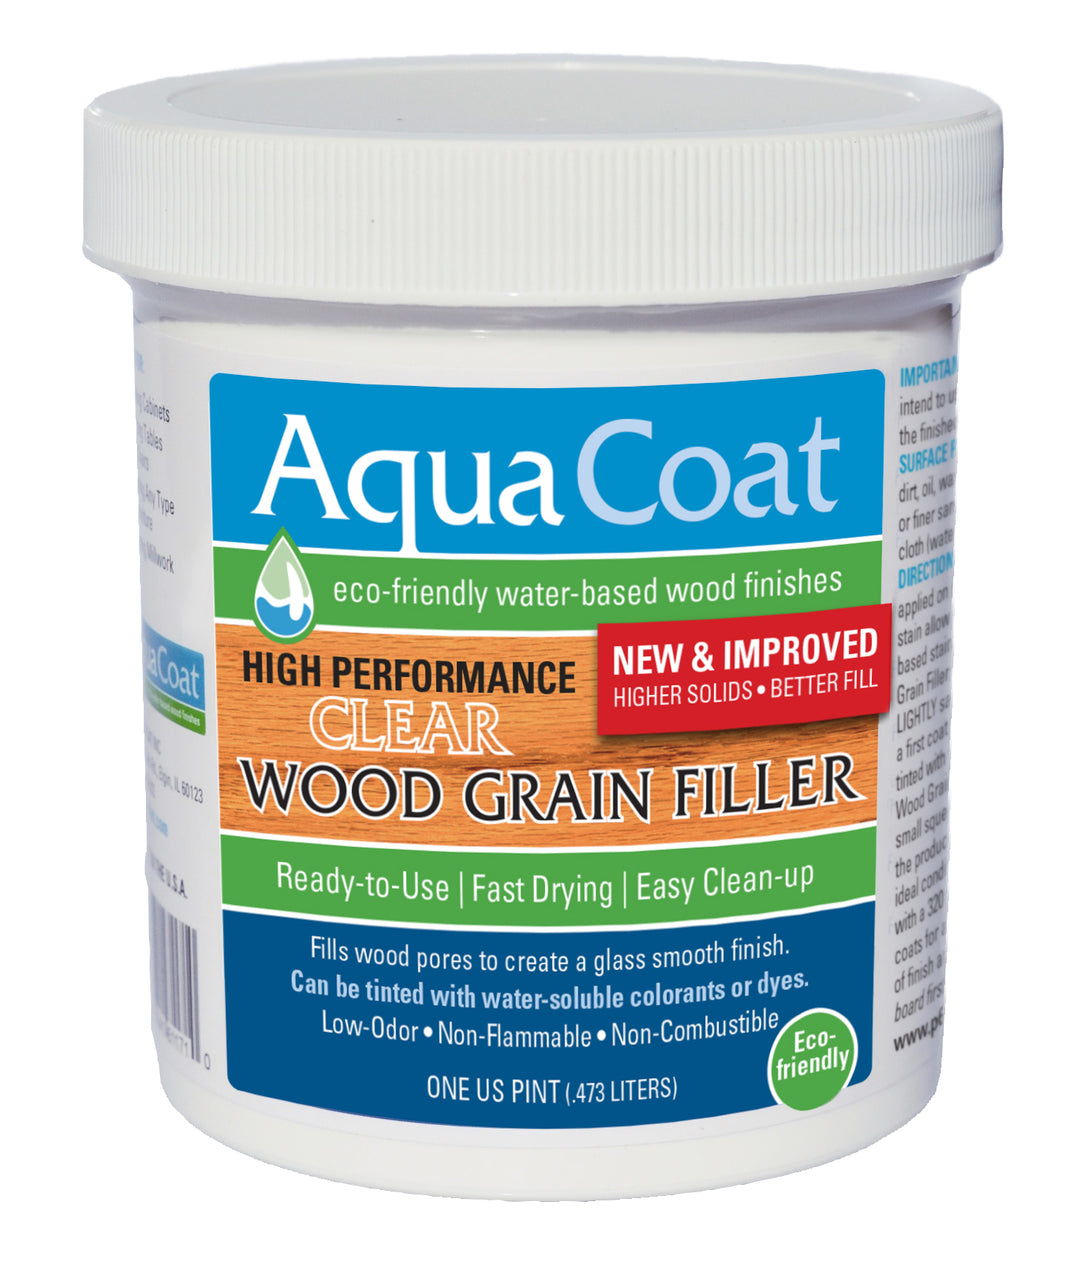 NEW AND IMPROVED High Performance Clear Wood Grain Filler